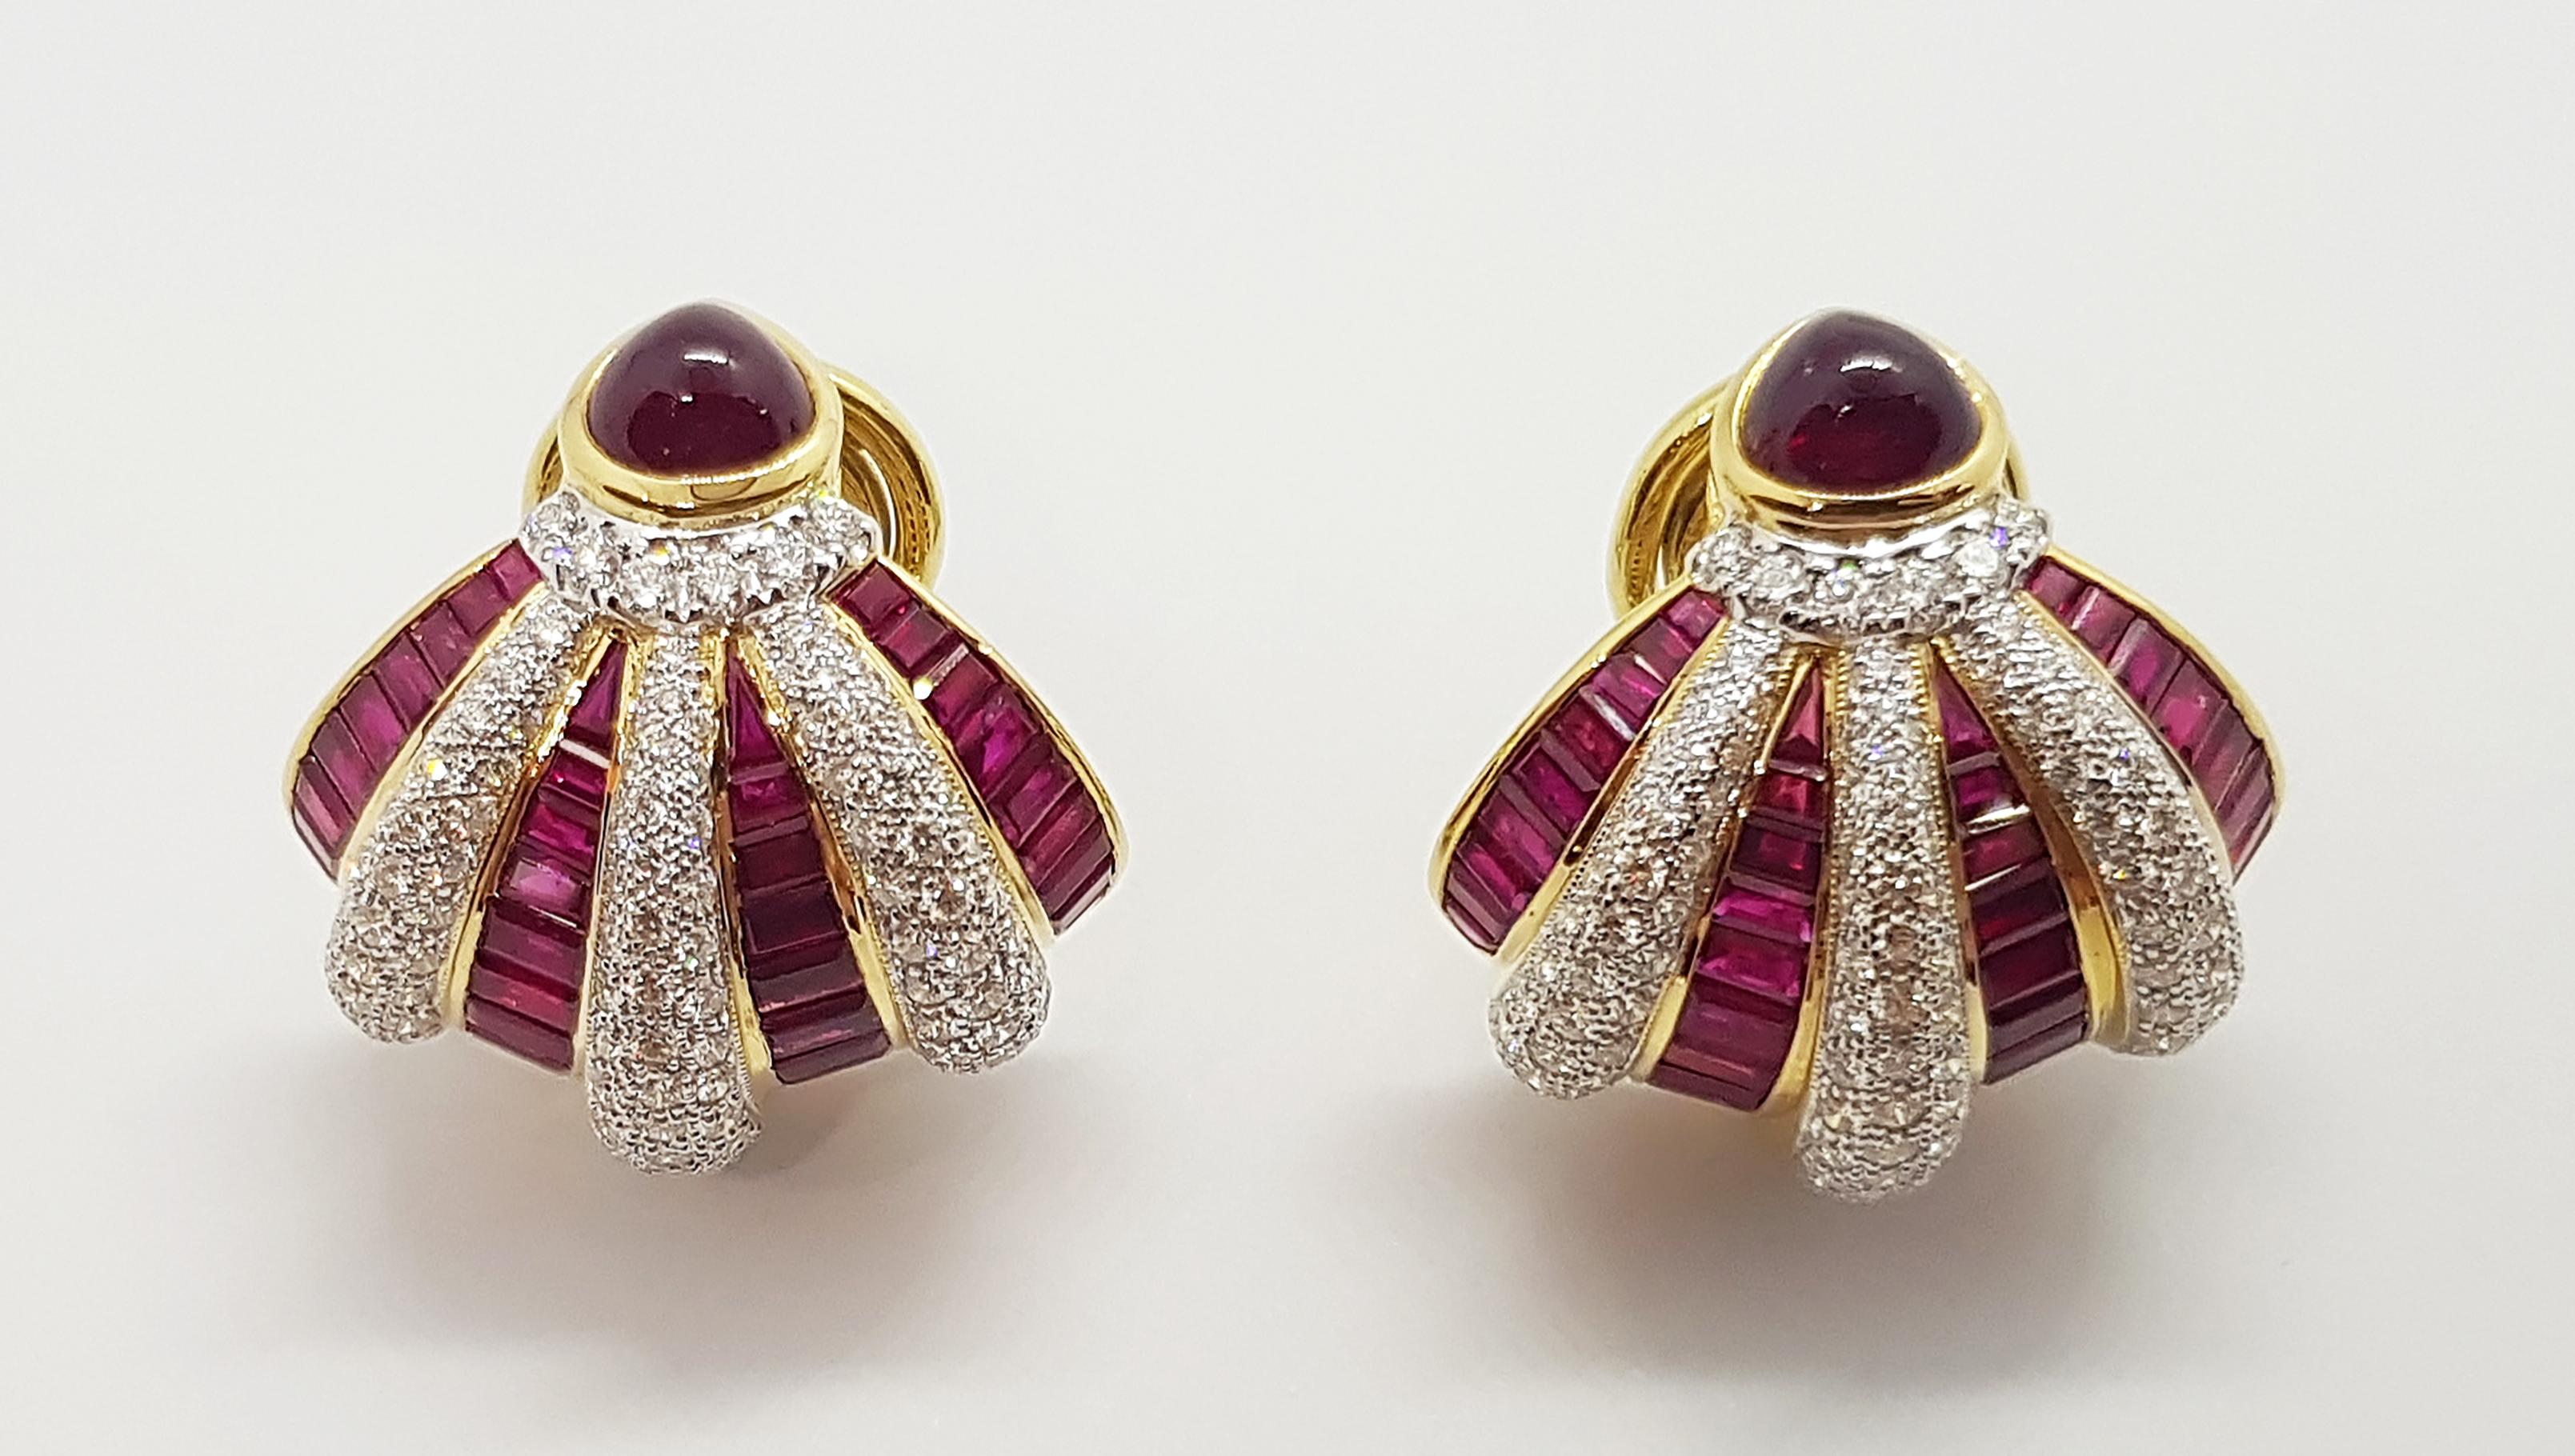 Ruby 7.90 carats, Cabochon Ruby 4.08 carats and Diamond 3.86 carats Earrings set in 18 Karat Gold Settings

Width:  2.5 cm 
Length:  2.5 cm
Total Weight: 27.67 grams

